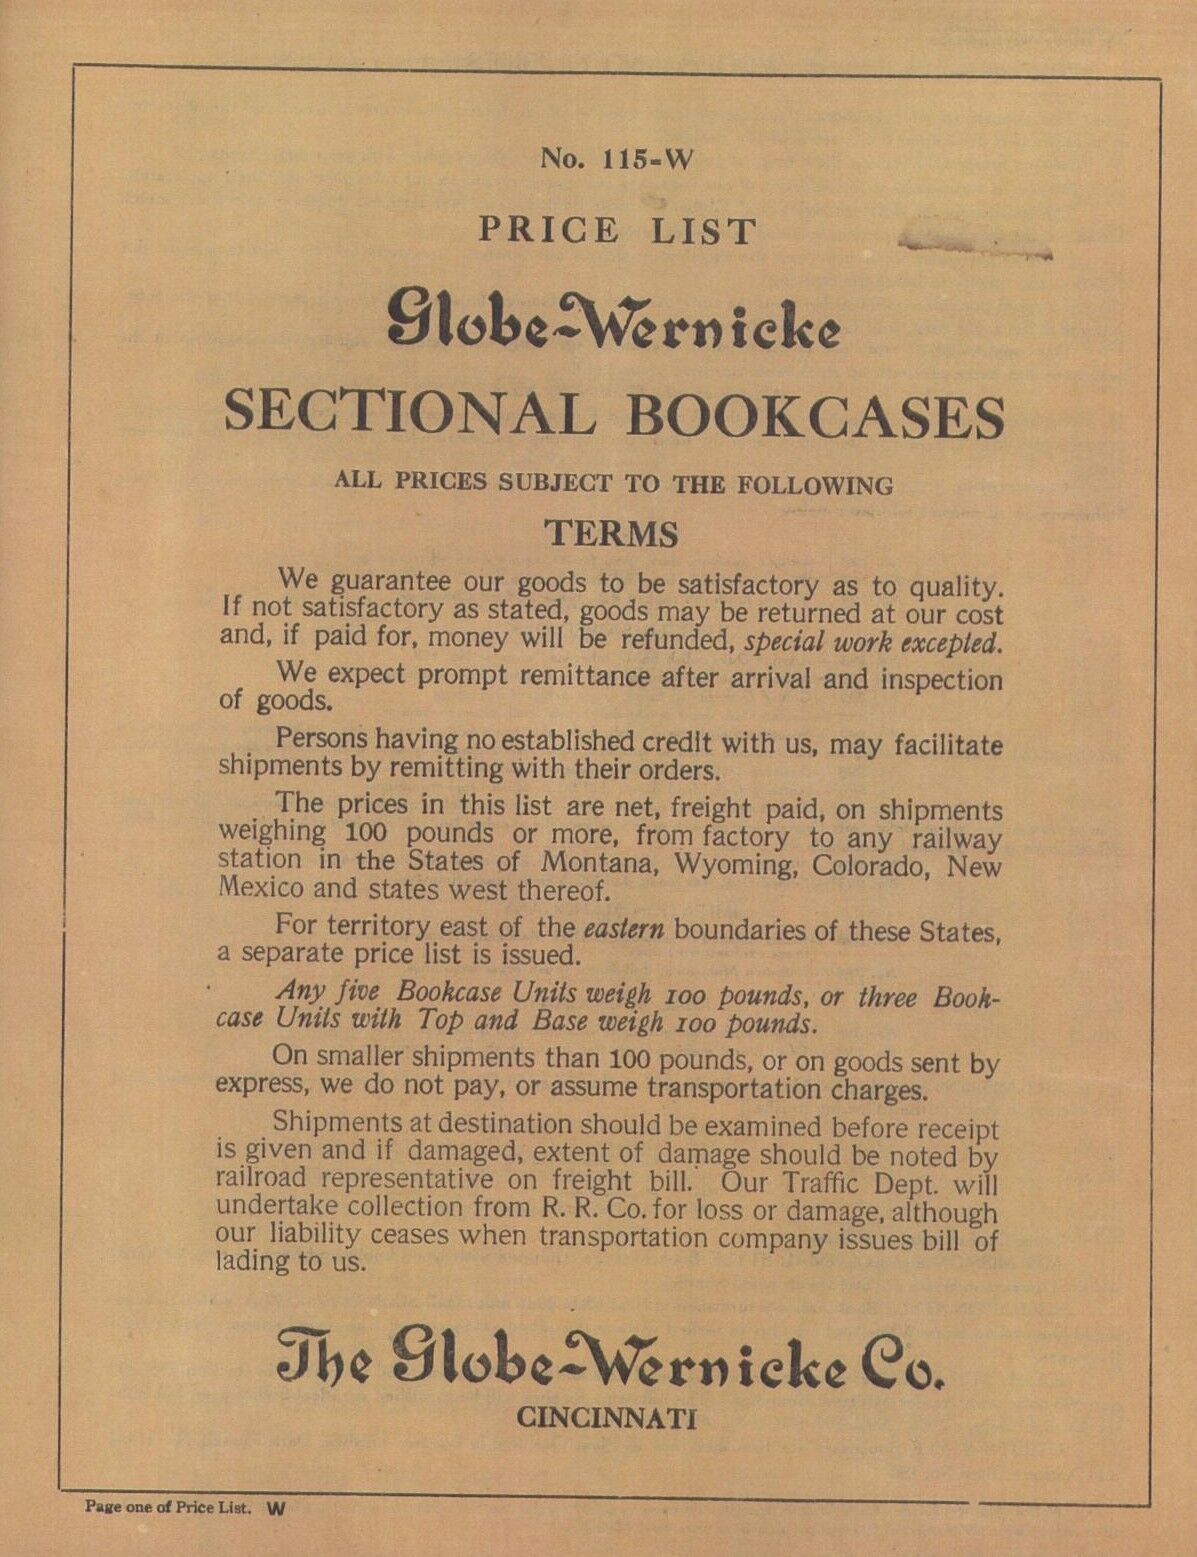 RARE 1915 GLOBE WERNICKE® SECTIONAL BOOKCASE PRICE LIST NOW LOWER PRICED COLOR